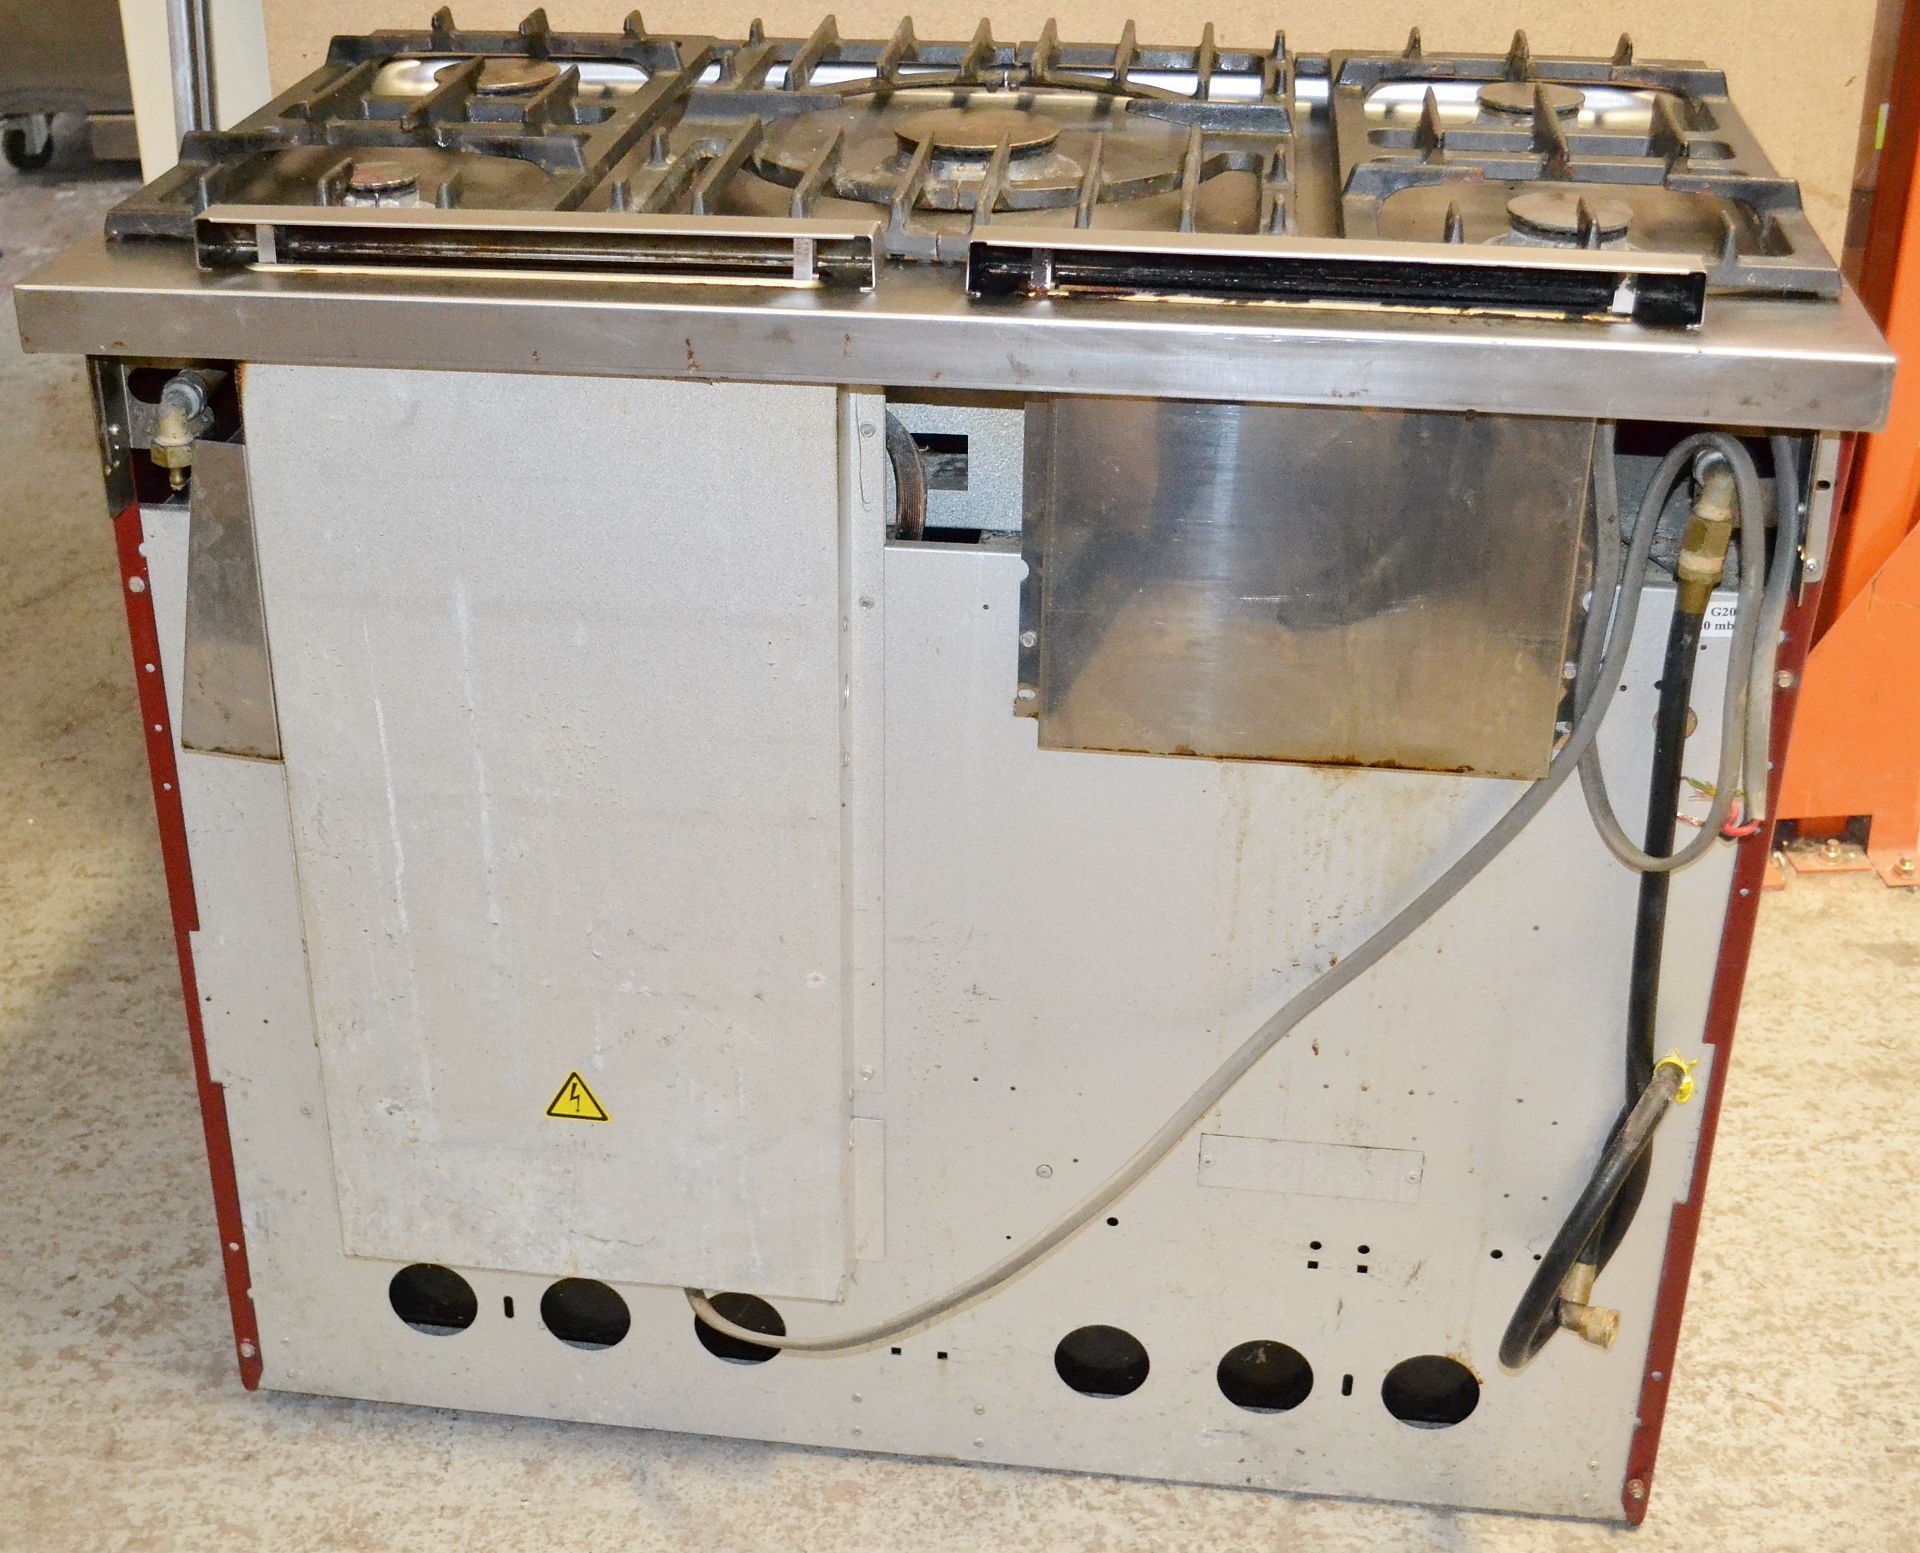 1 x Lacanche Cluny Classic 100 (Cote d'Or) Range Cooker Double Oven in Red - Dual Fuel - Used - - Image 7 of 21